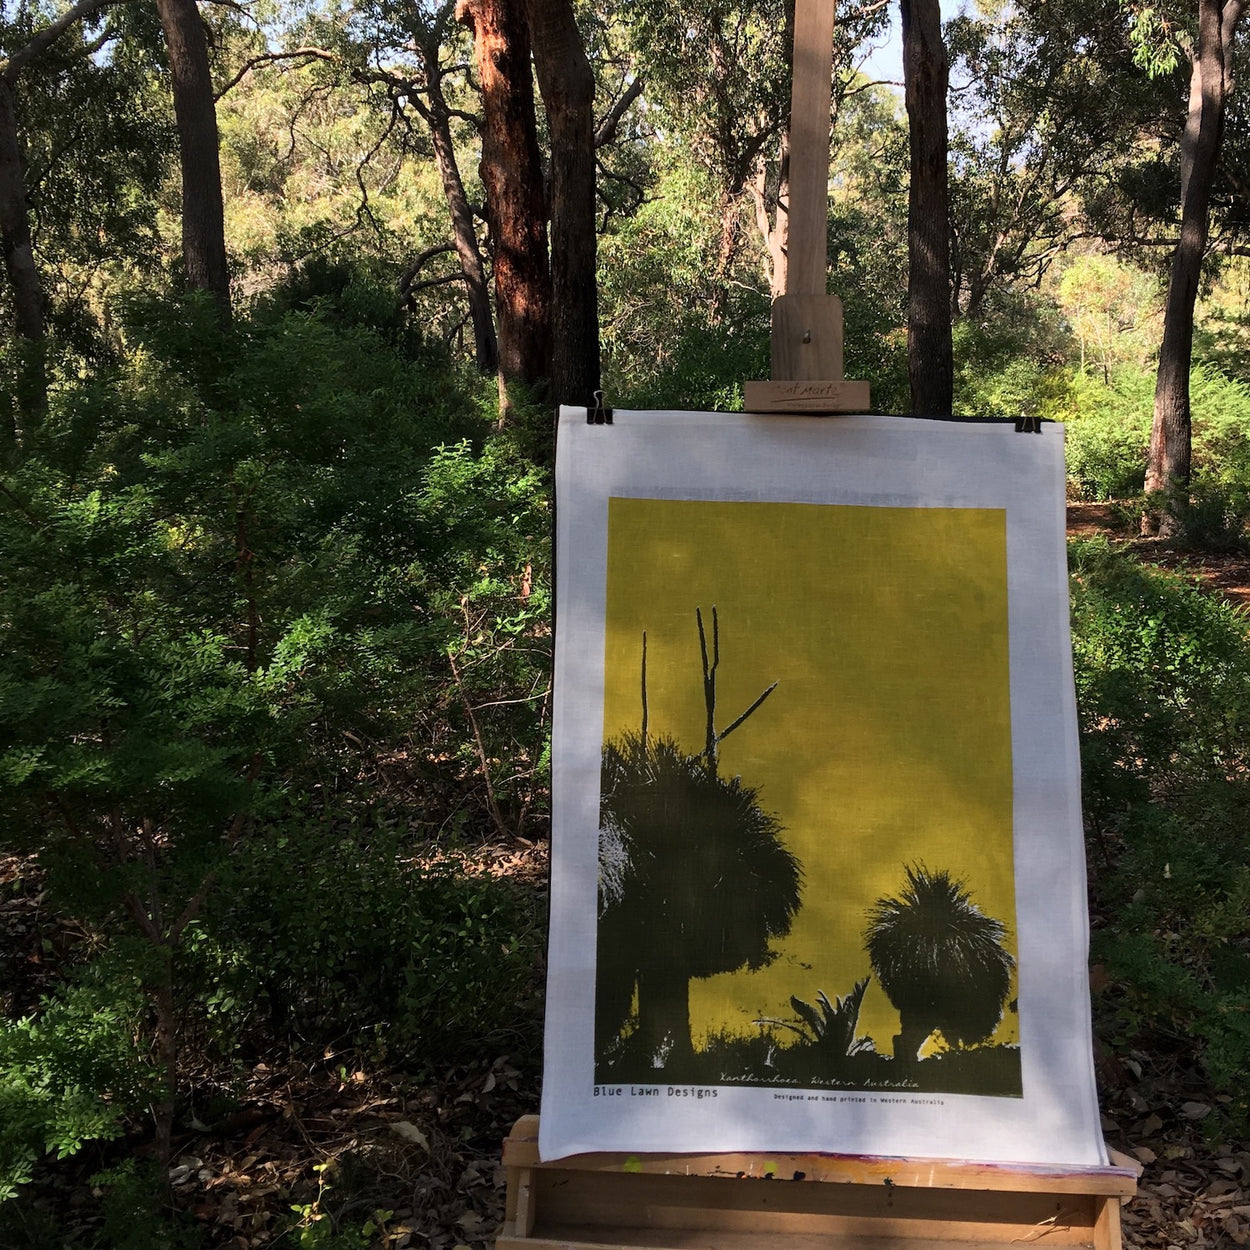 Photograph of a grass trees tea towel on an easel in the forest.